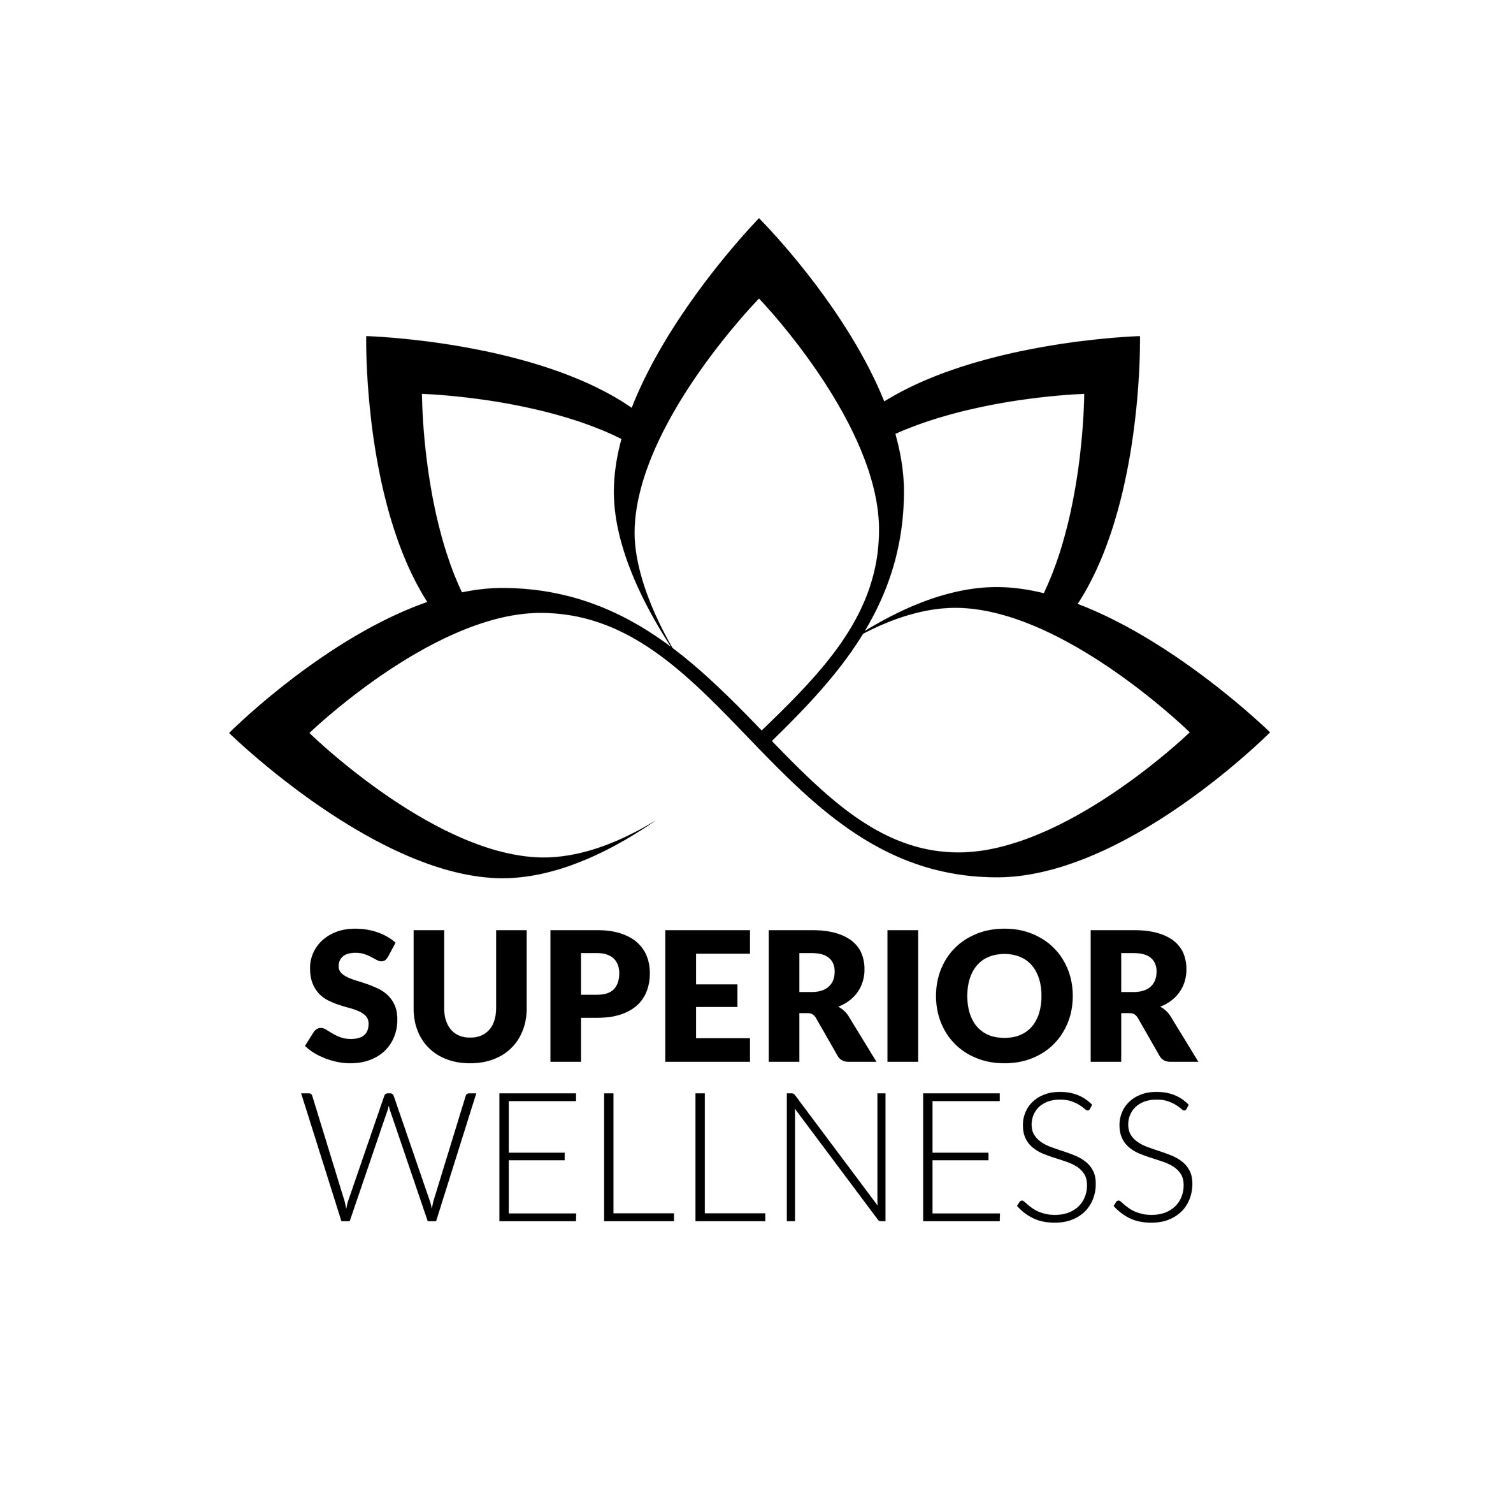 Superior Wellness named as the 14th Fastest Growing Company on the Midlands and East of England 2023 Fast Growth 50 index